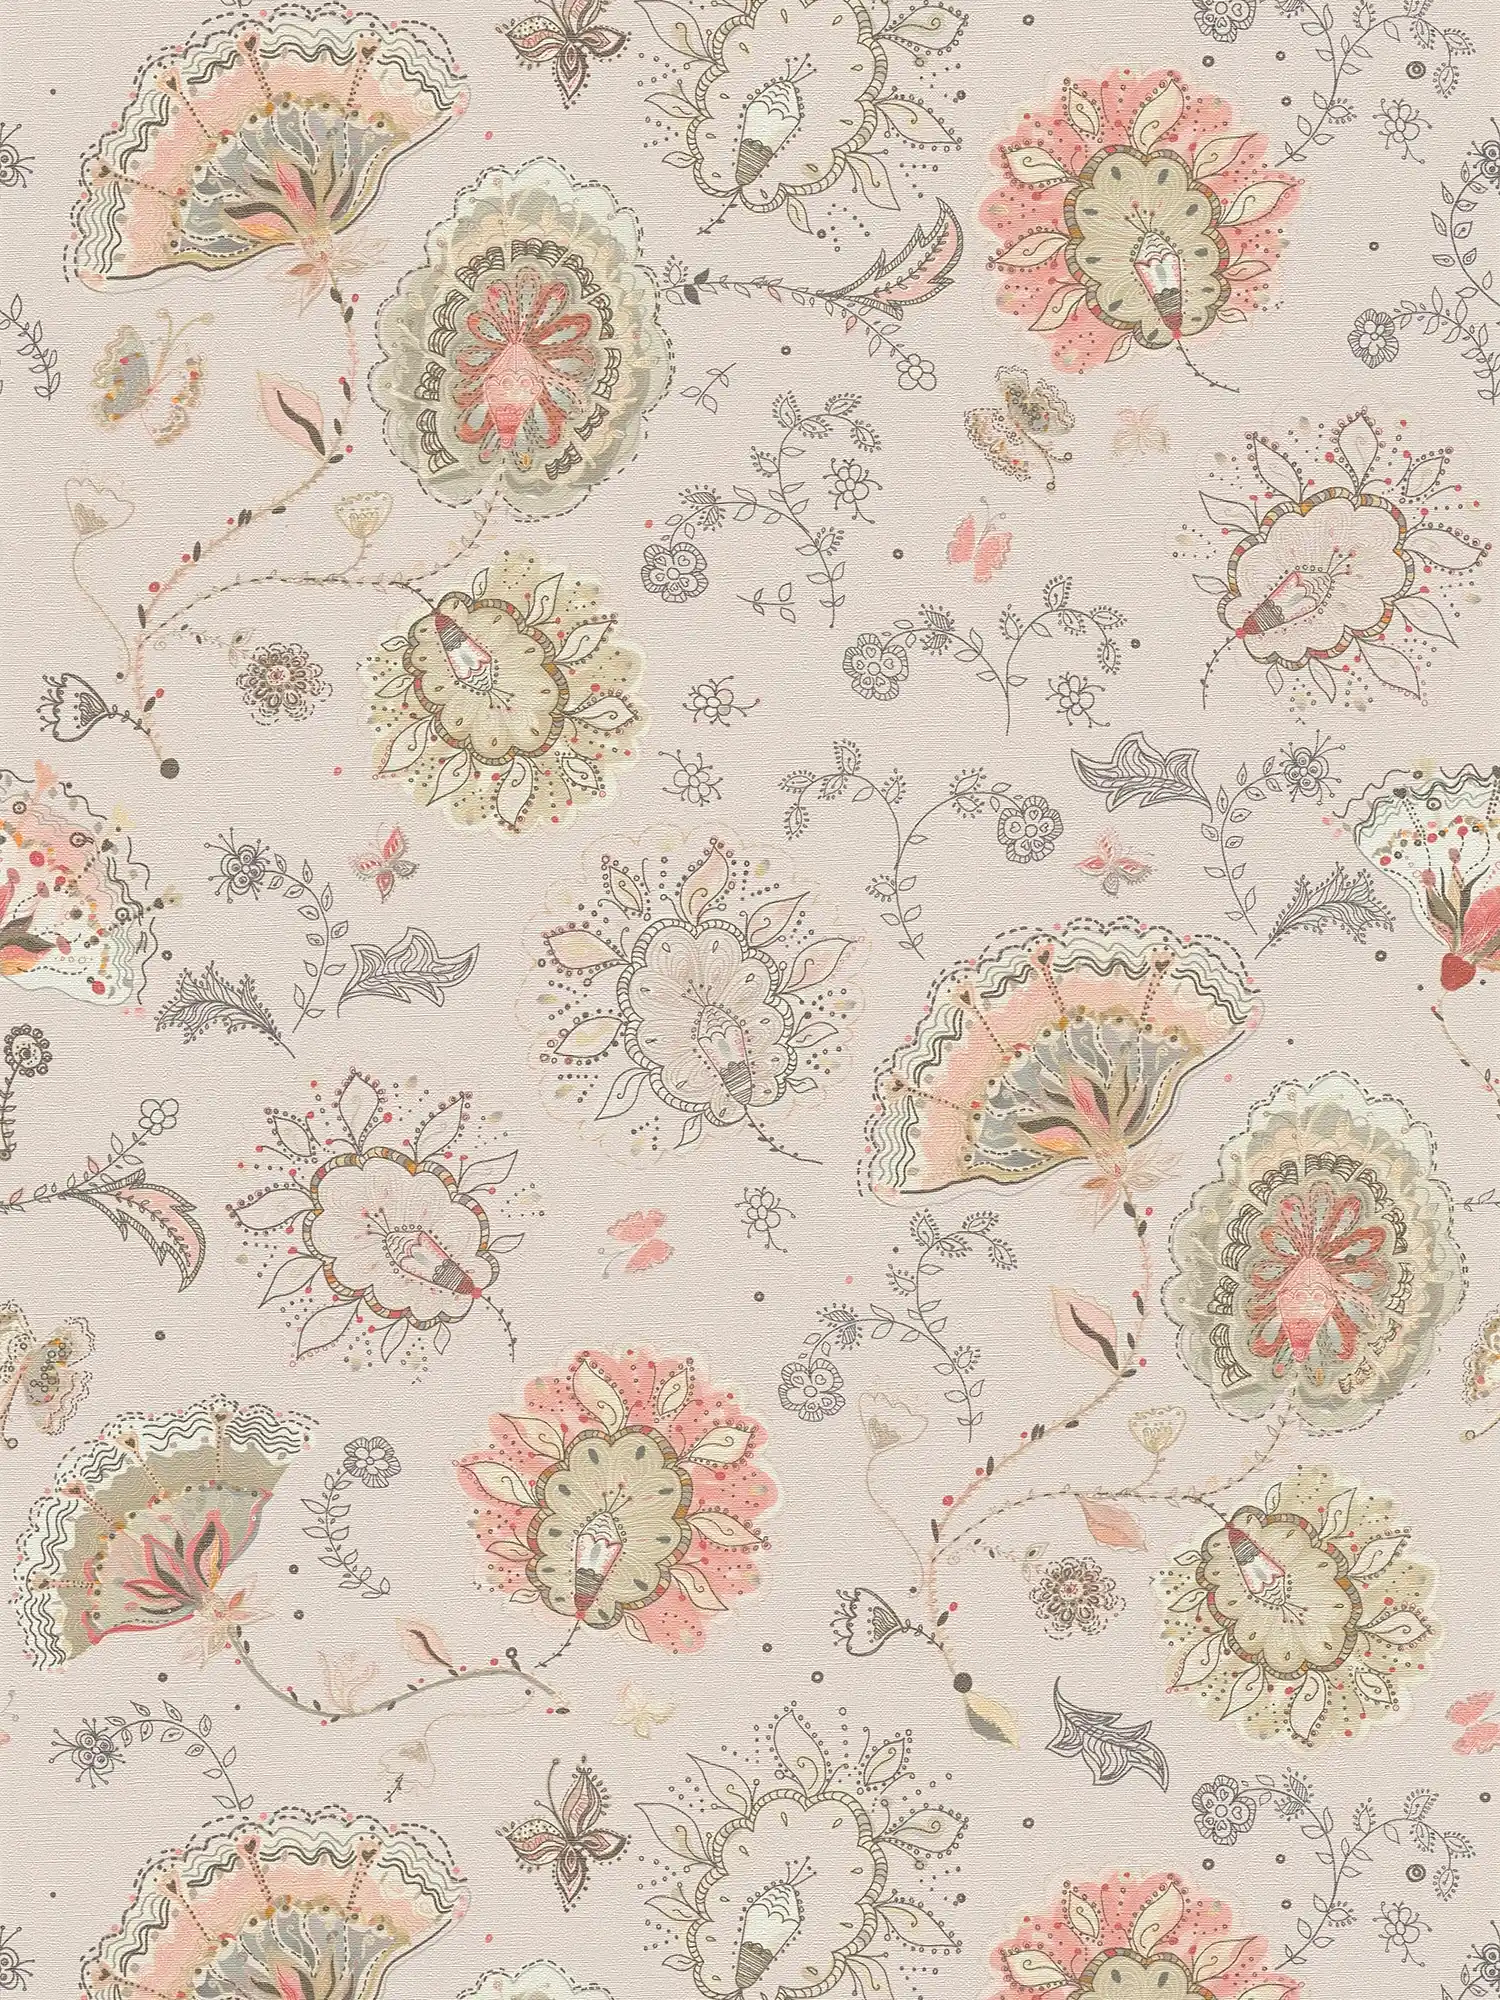 Floral wallpaper with abstract floral pattern & fine structure - grey, beige, red
